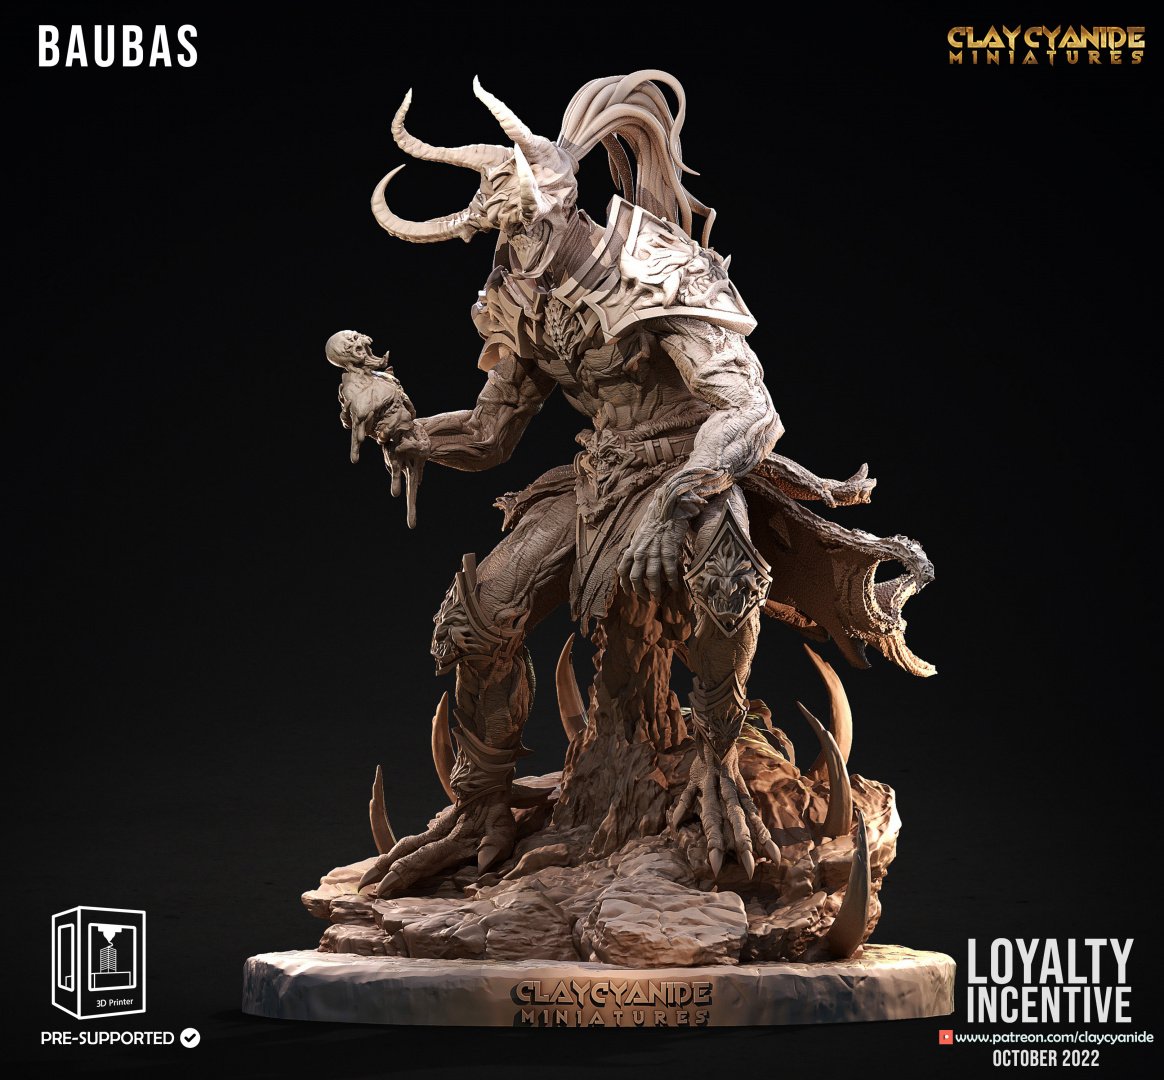 Clay Cyanide Miniatures October 2022 (Loyalty Incentive) Clay Cyanide  MINISTL